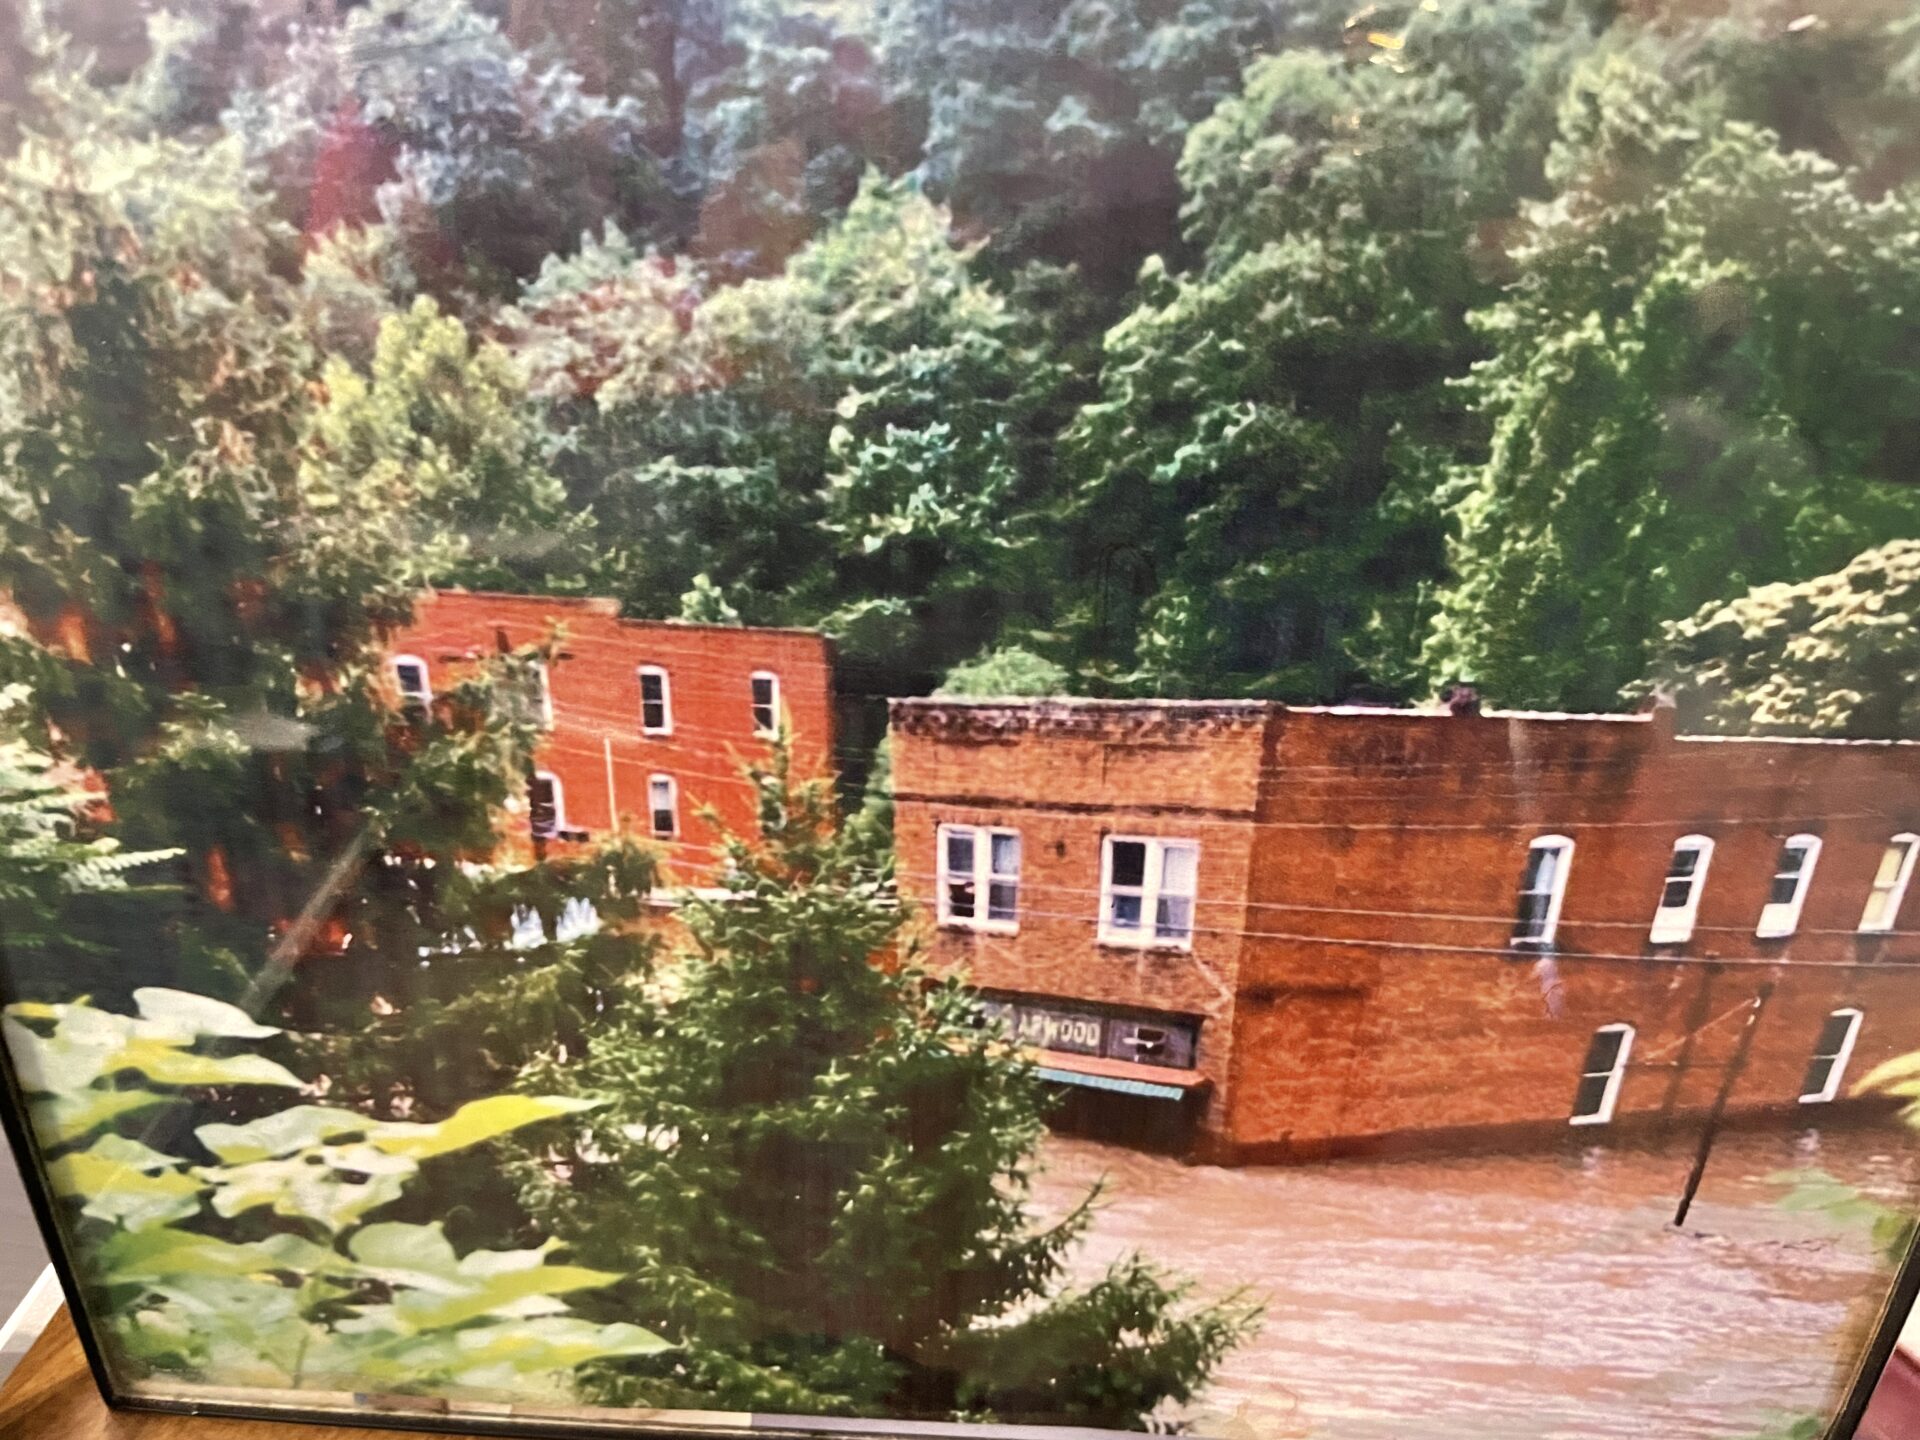 Remembering Floods And Recovering From Disaster, Inside Appalachia